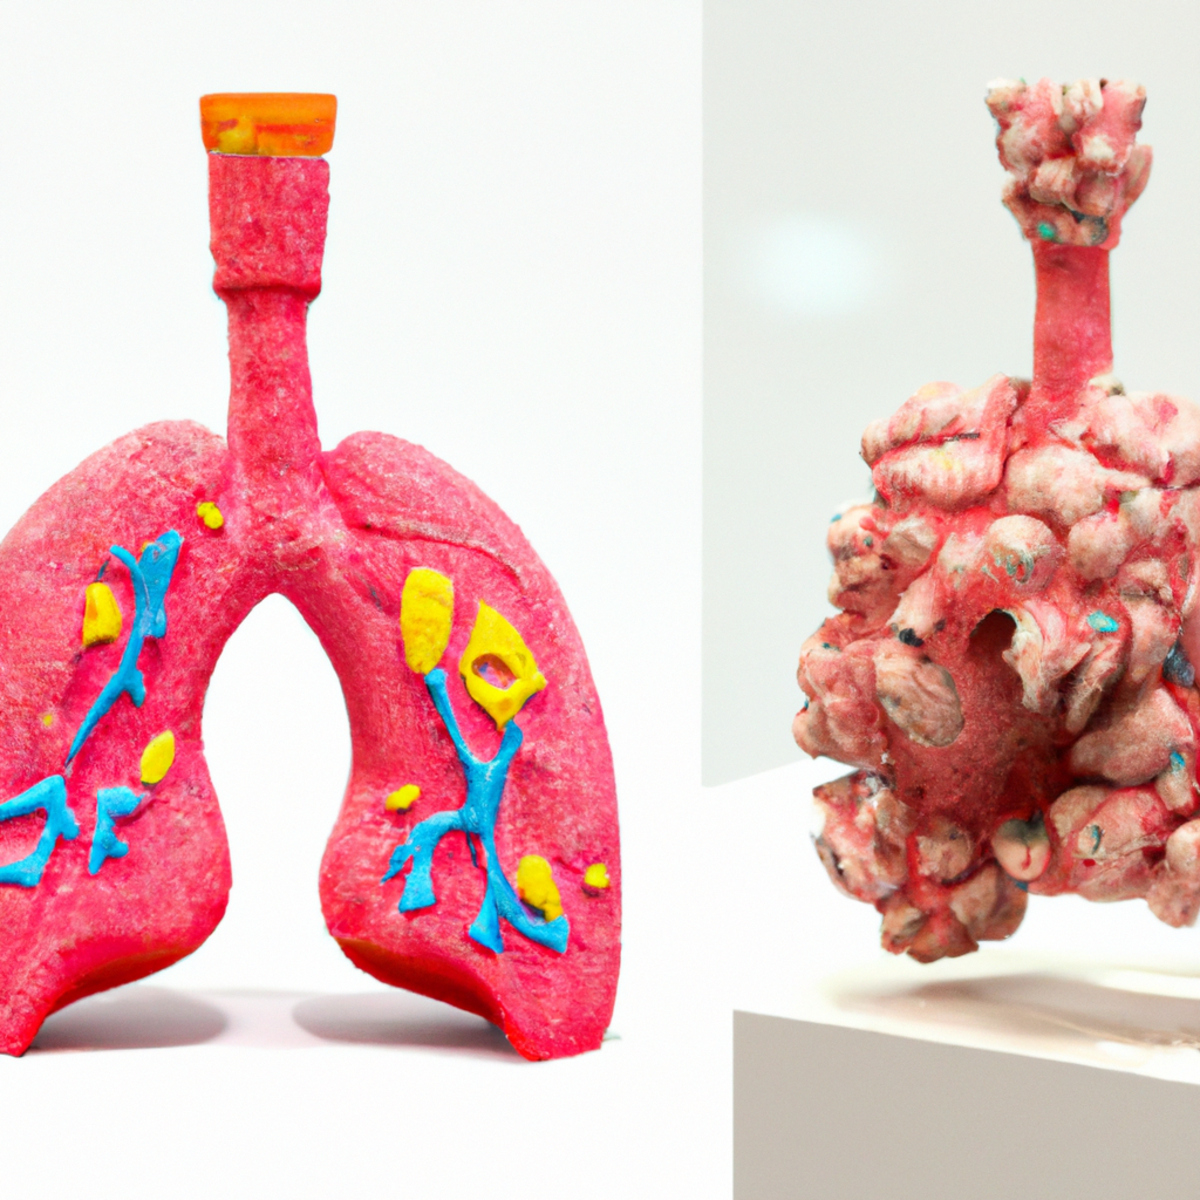 Detailed lung model with magnifying glass, lifestyle symbols, on white - Alpha-1 Antitrypsin Deficiency